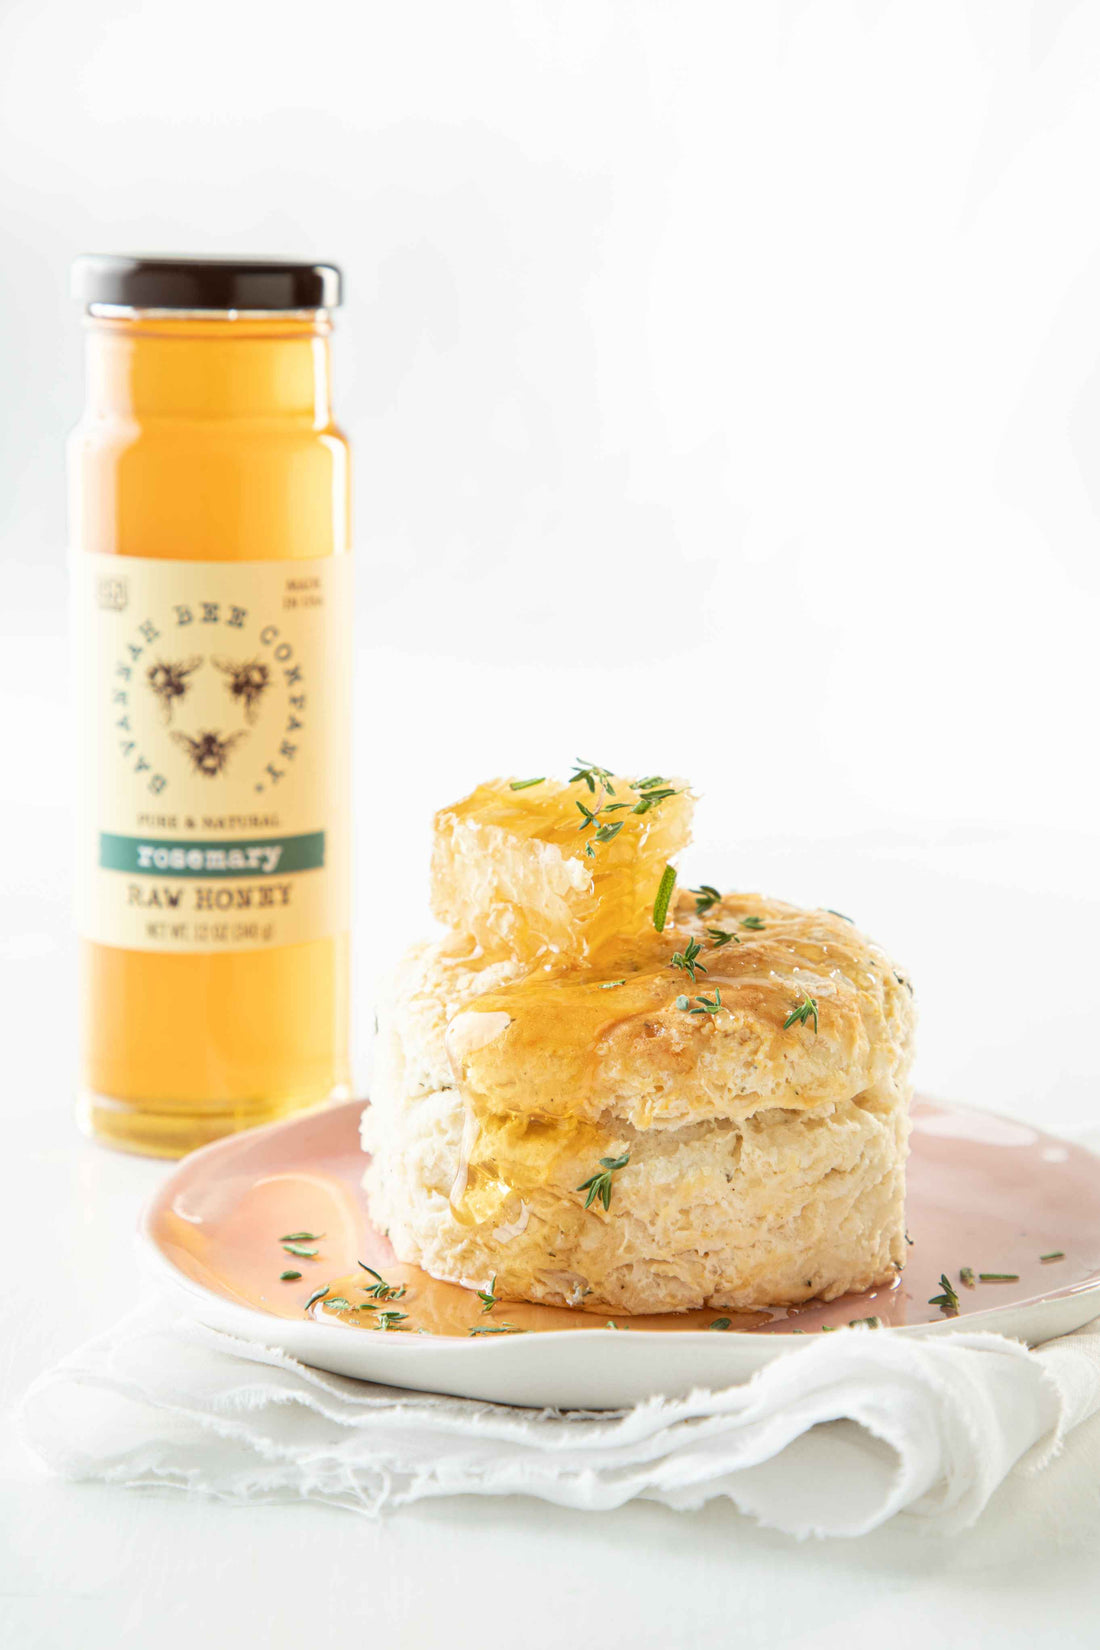 honey-and-herb-cathead-biscuits-biscuit-recipe-savannah-bee-company